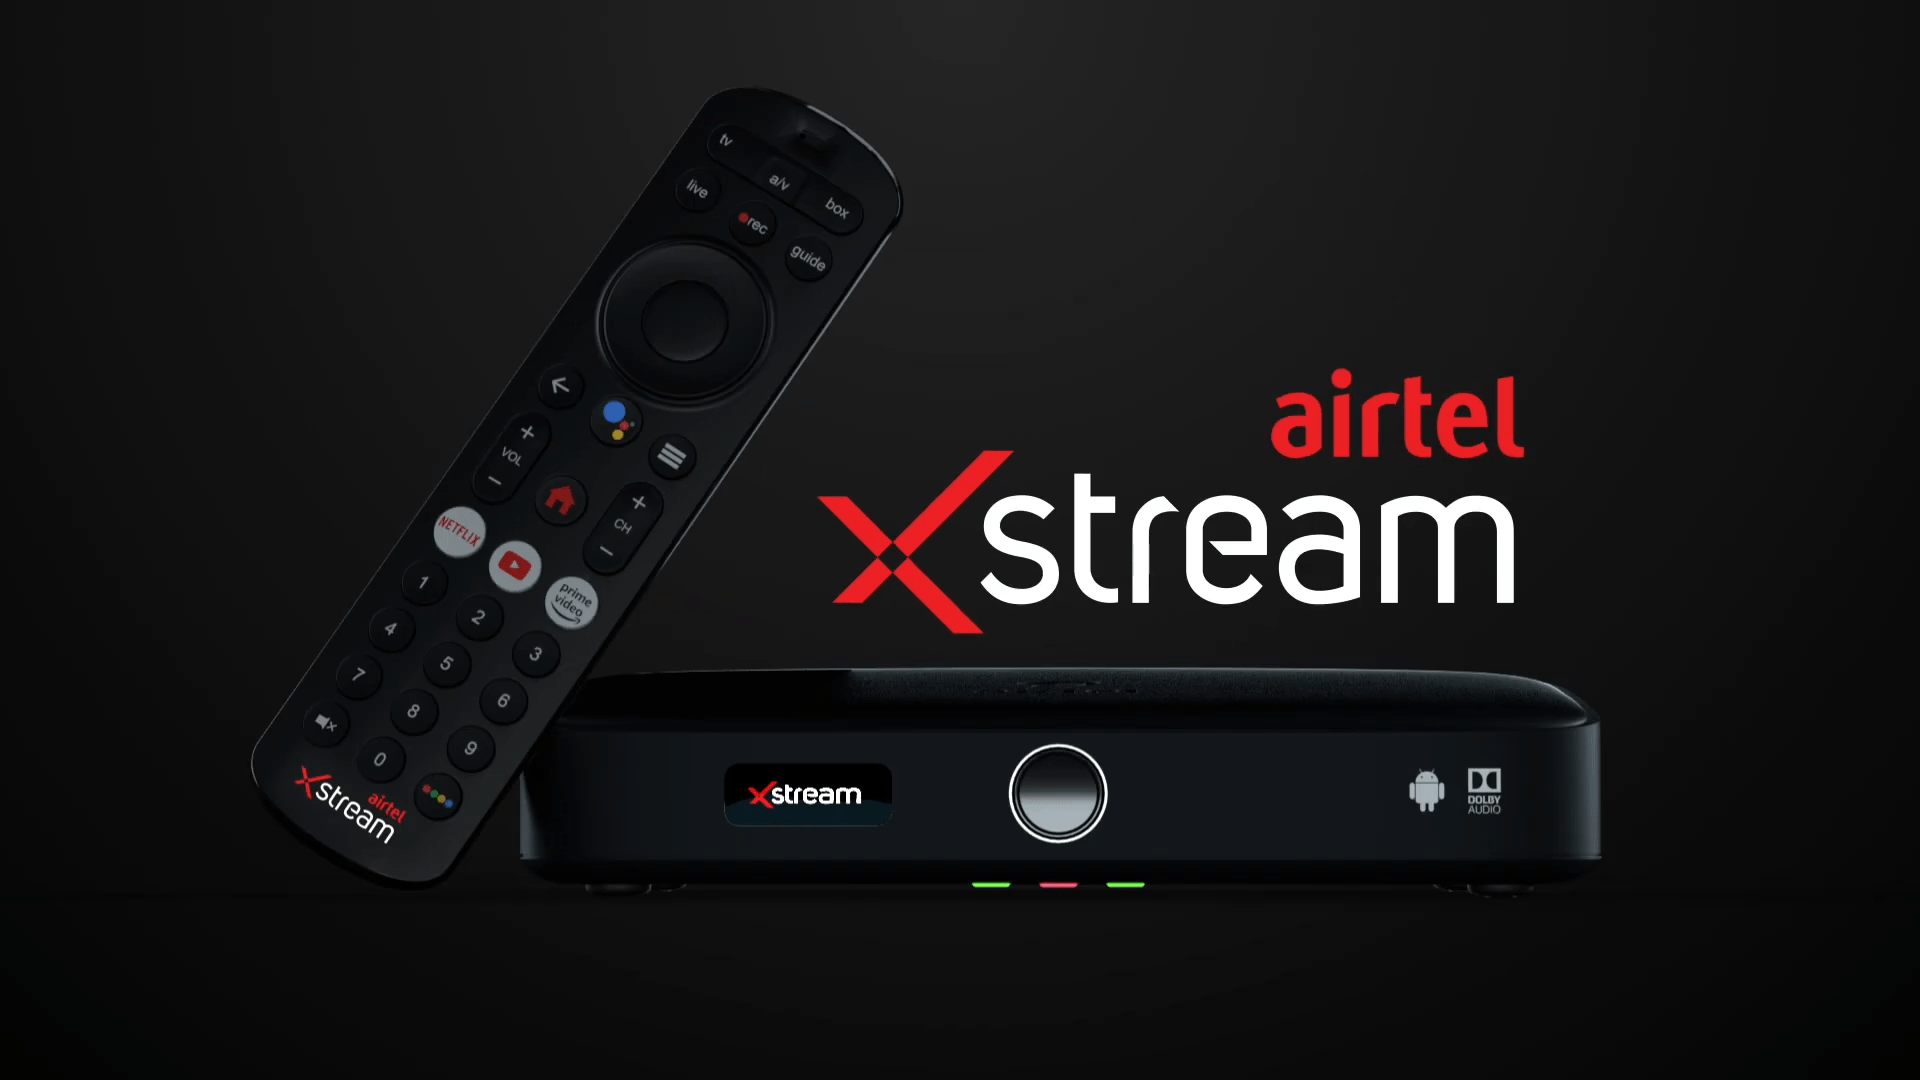 Airtel Xstream Fiber - All Plans Are Unlimited Now | Jio Effect | Free Apps Too